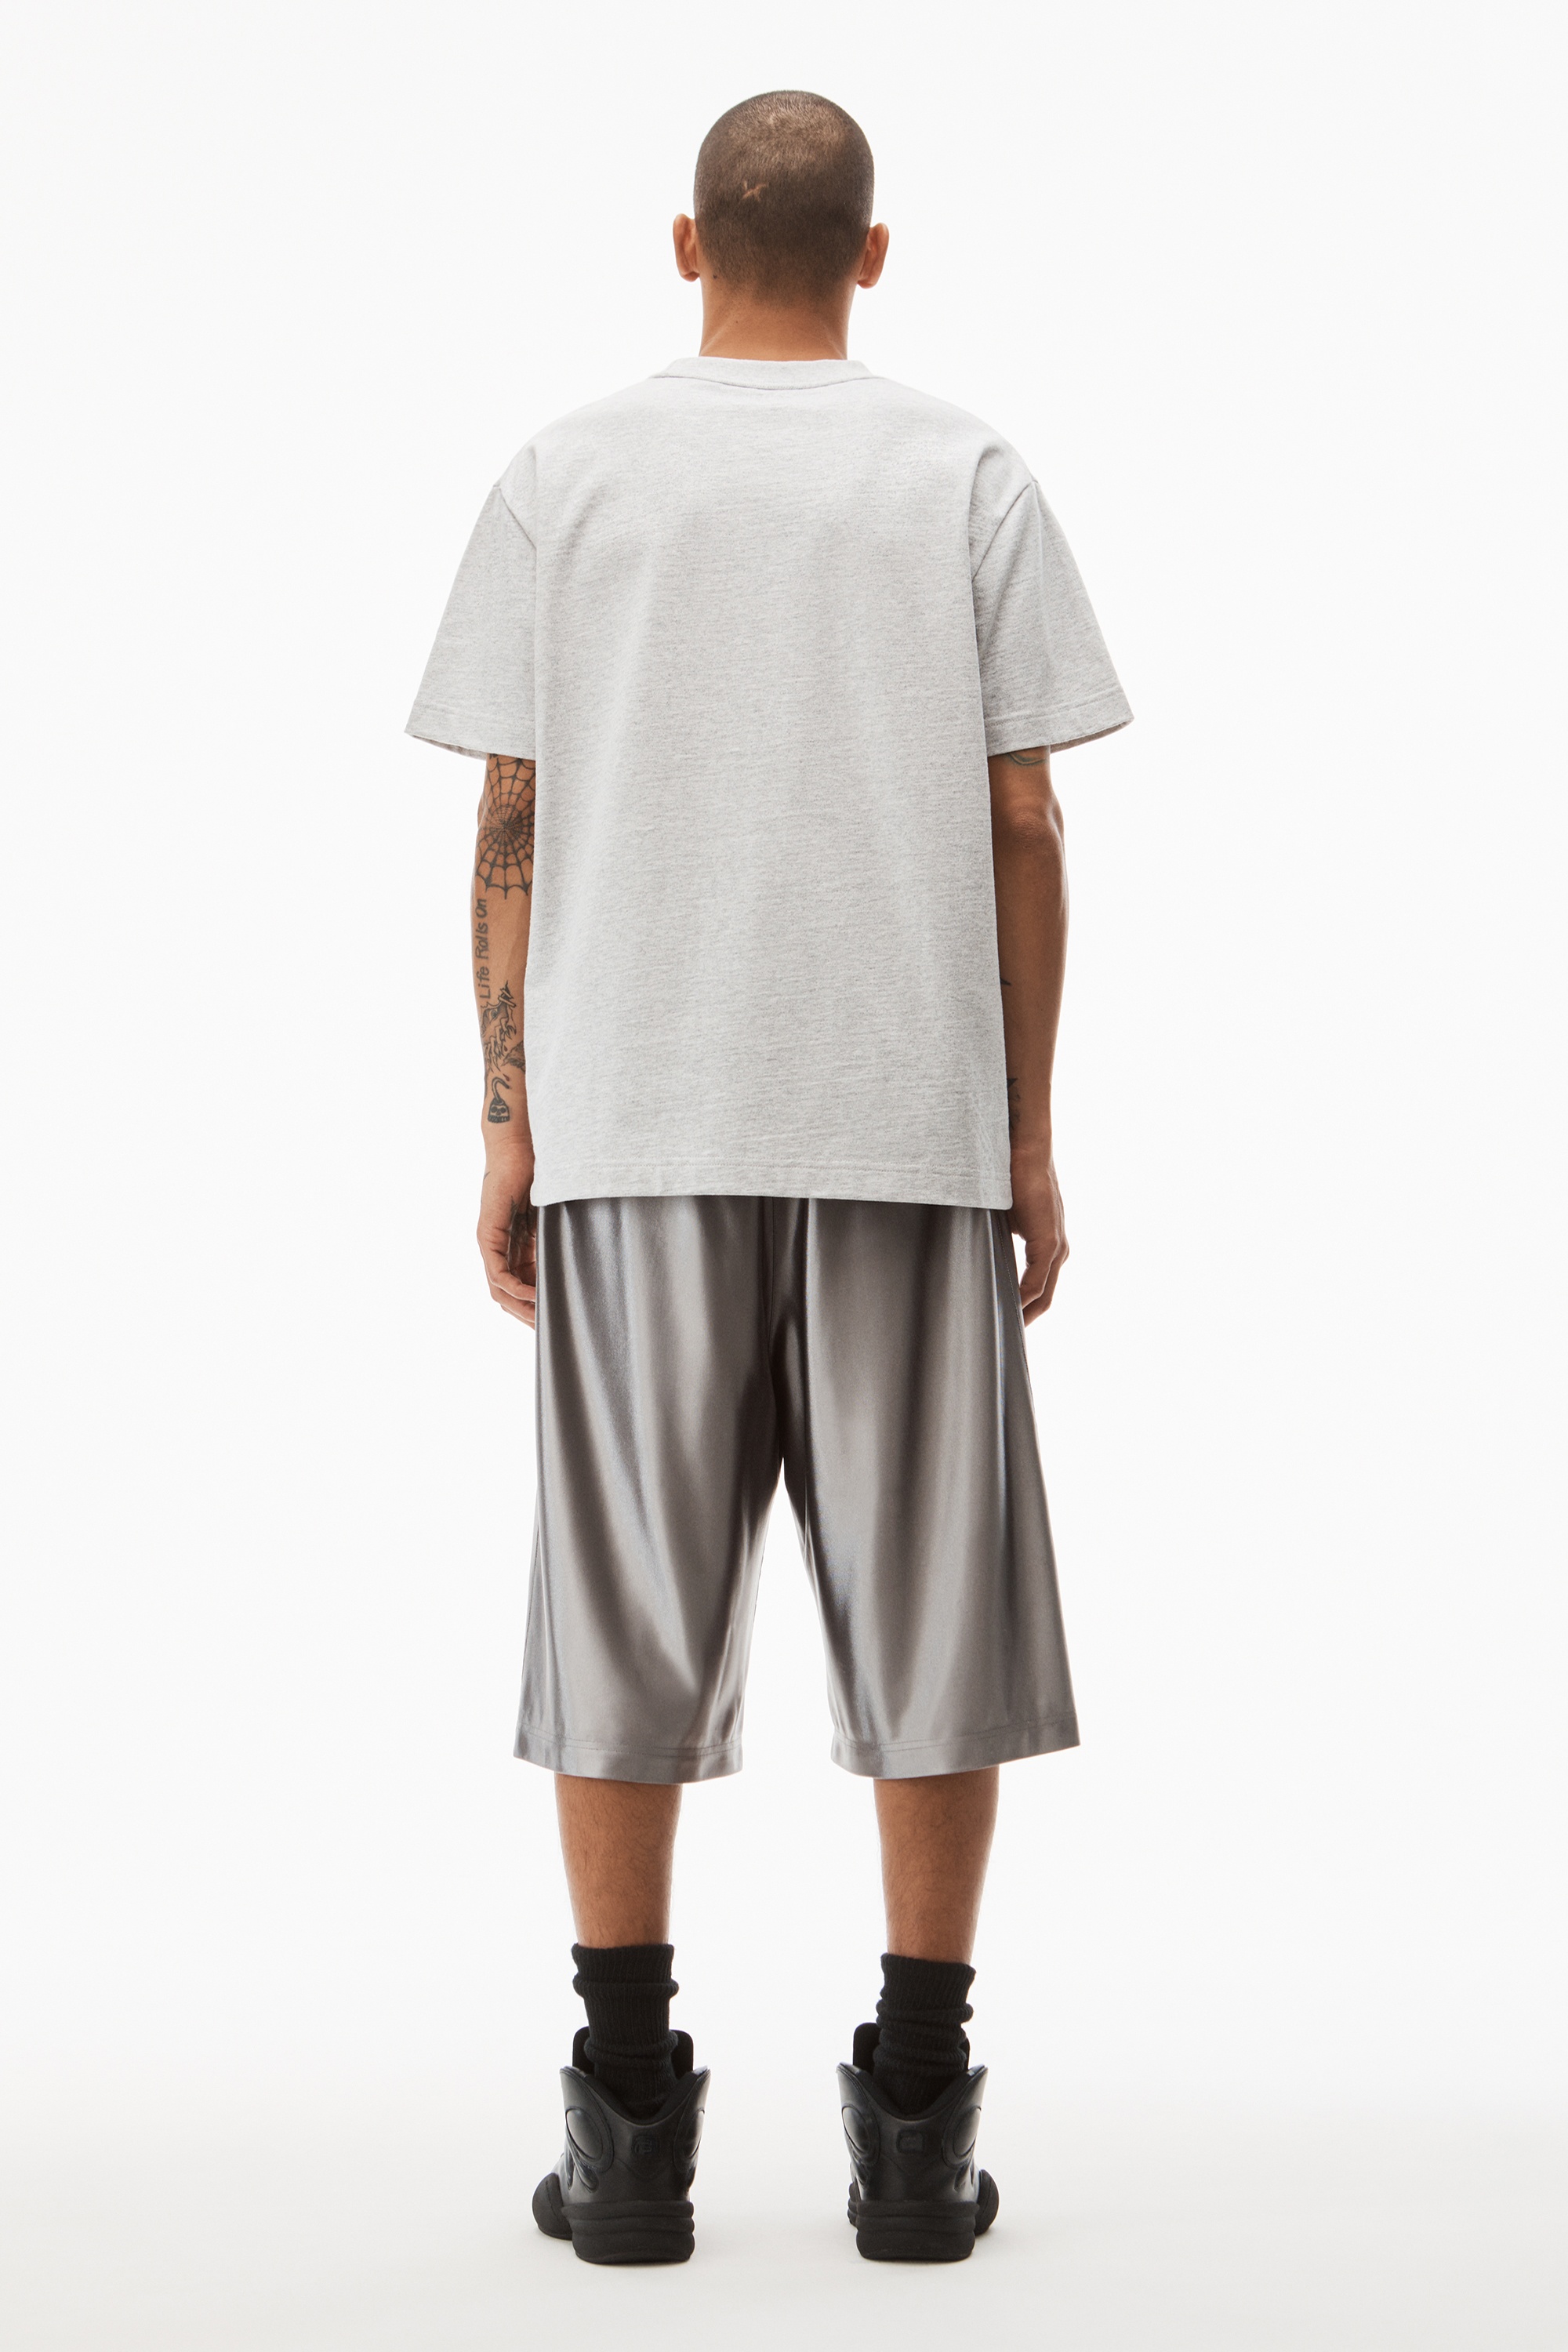 PUFF LOGO SHORT SLEEVE TEE IN COMPACT JERSEY - 4